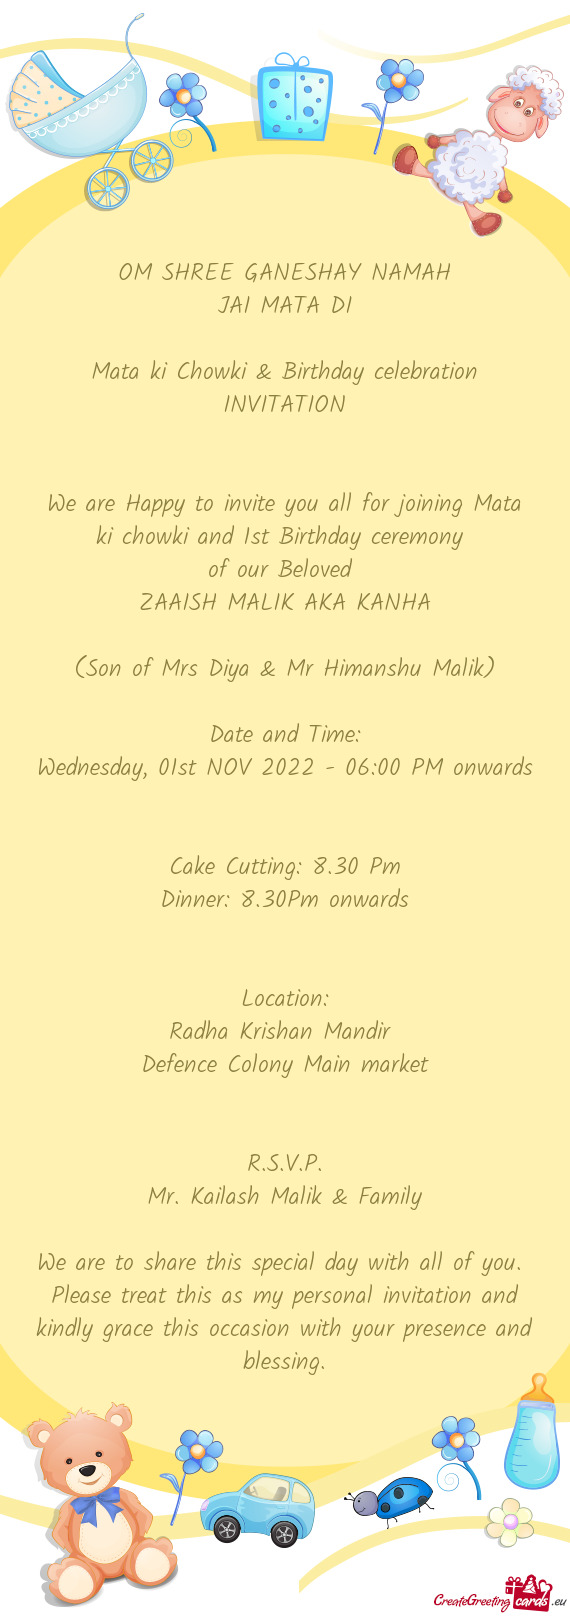 We are Happy to invite you all for joining Mata ki chowki and 1st Birthday ceremony